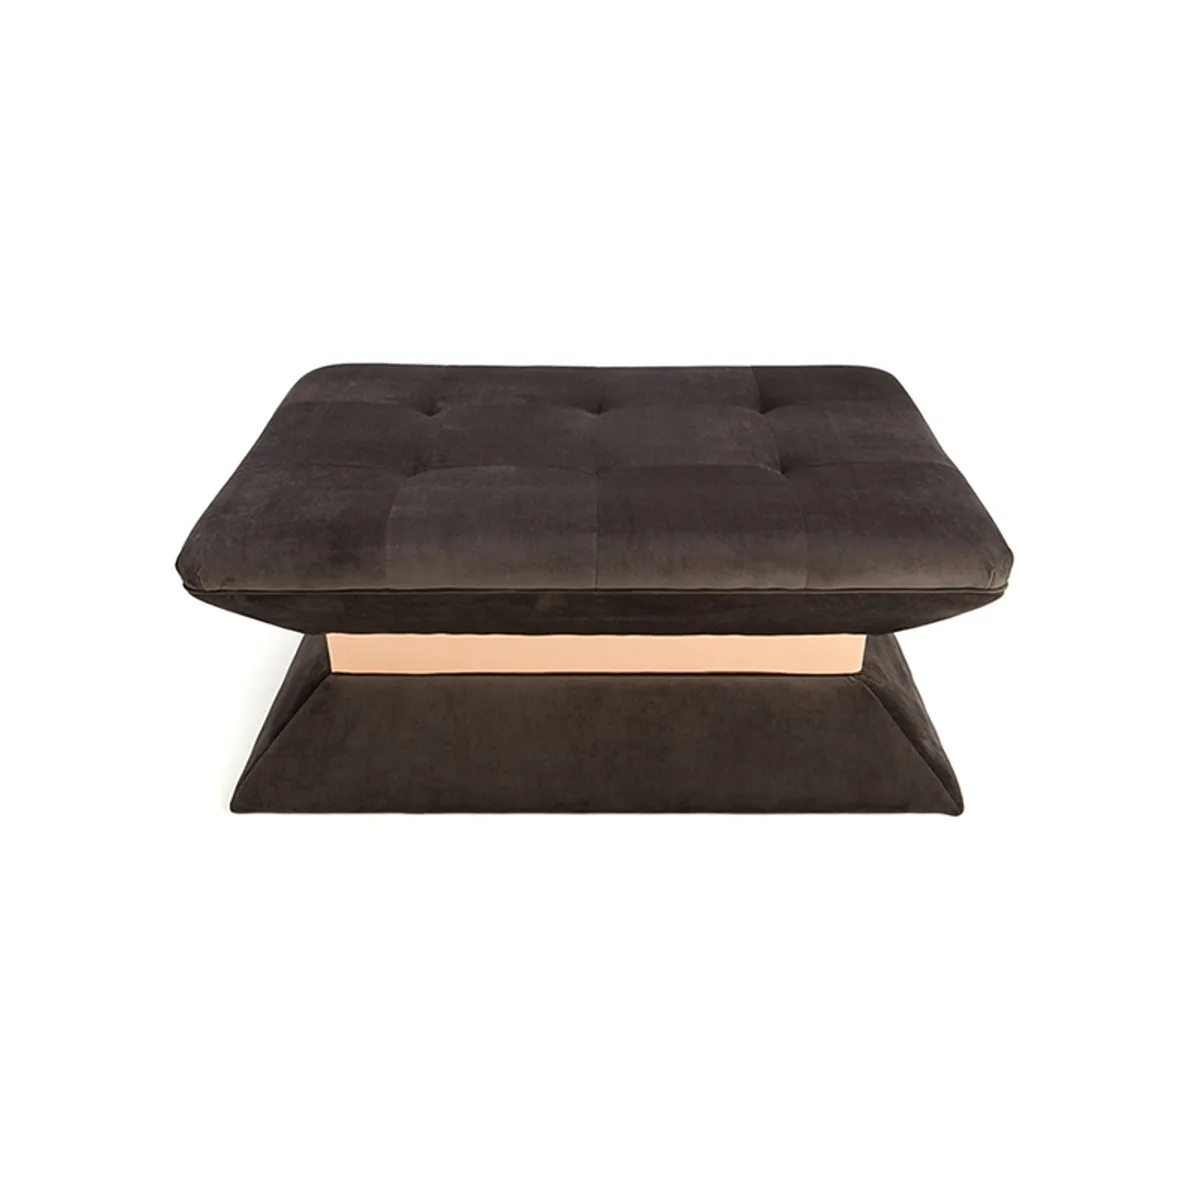 Rogue Rectangular Stool For Cafes Bars And Hotels